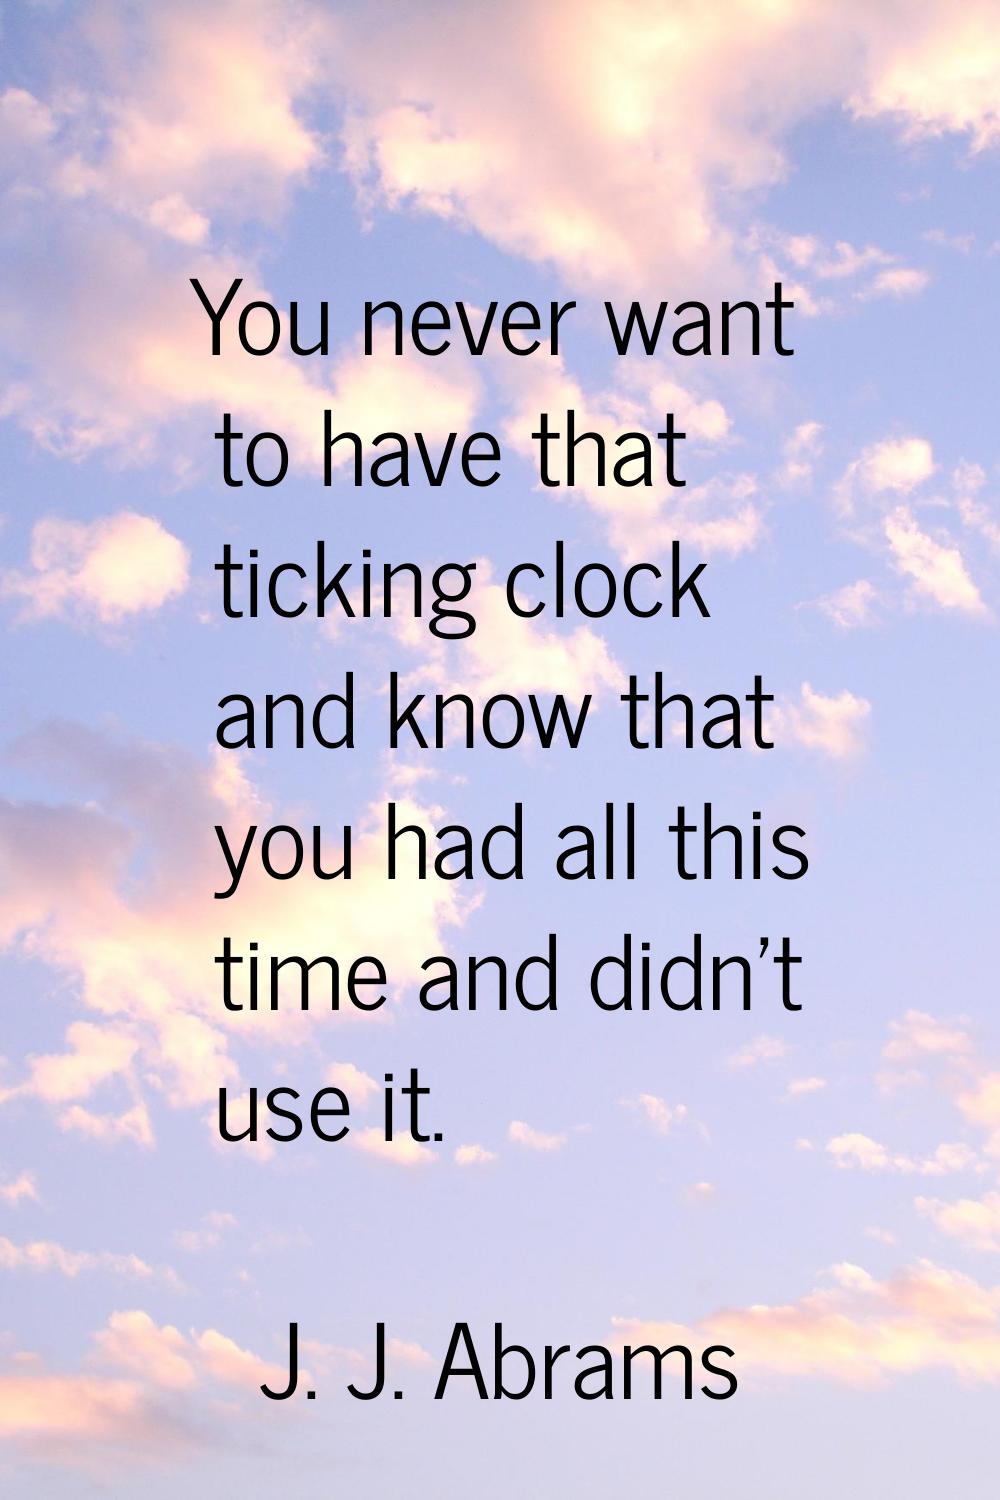 You never want to have that ticking clock and know that you had all this time and didn't use it.